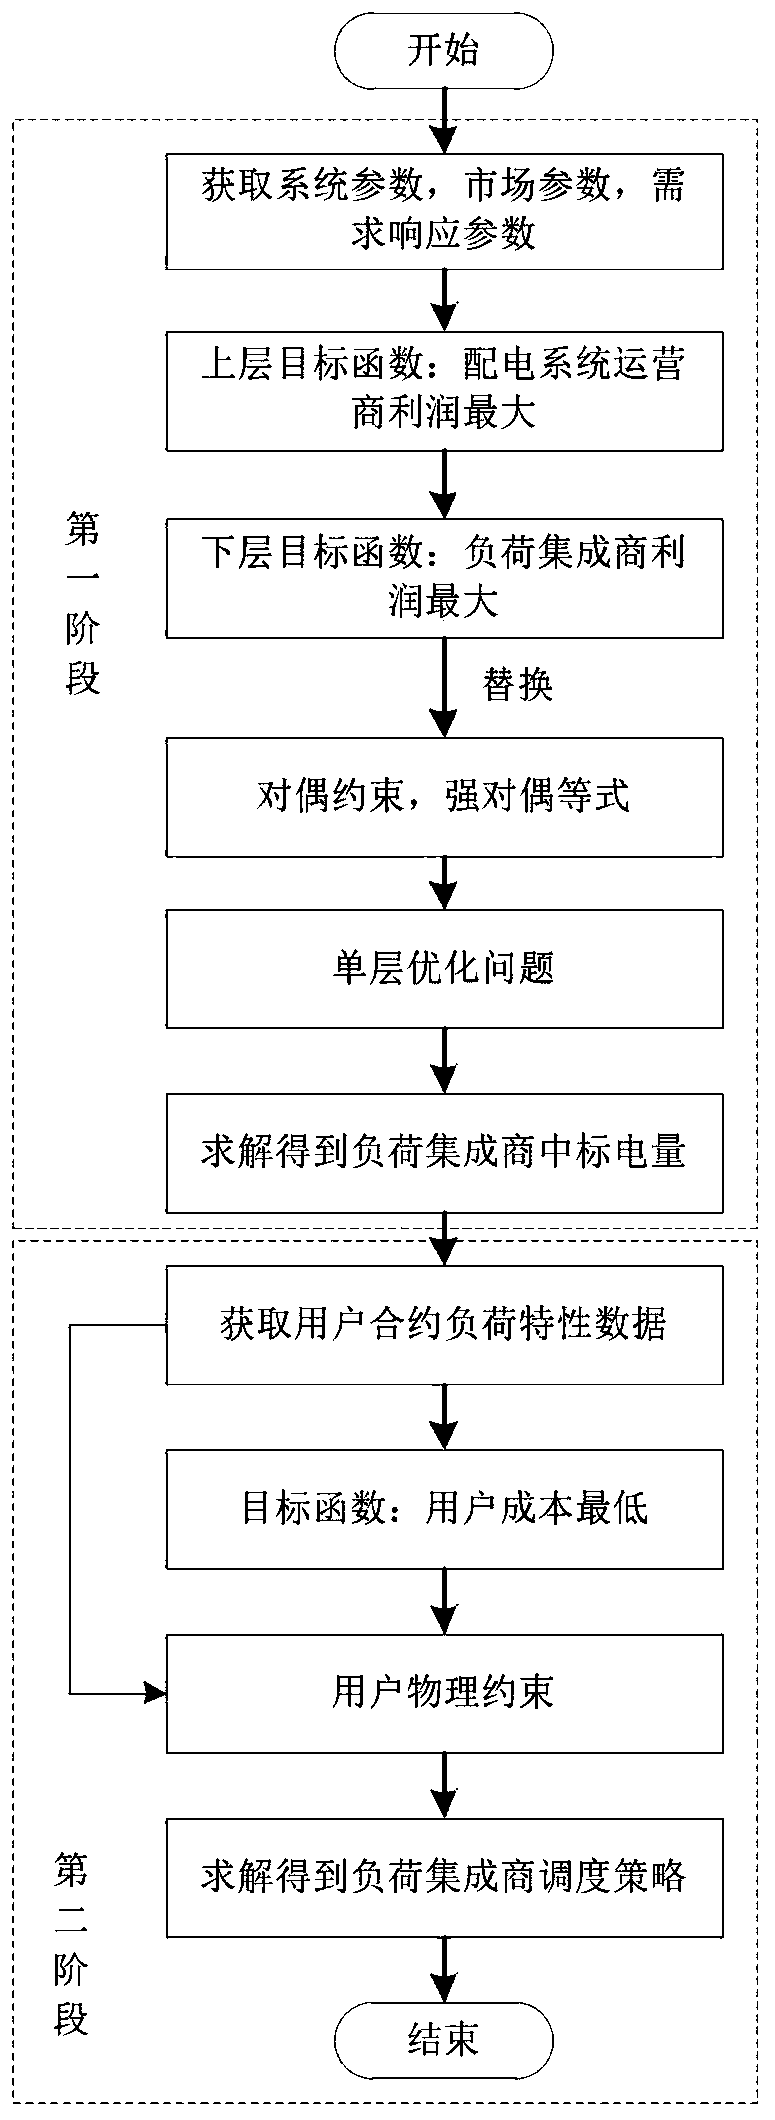 Double-layer two-stage demand response scheduling method and system based on load integrator